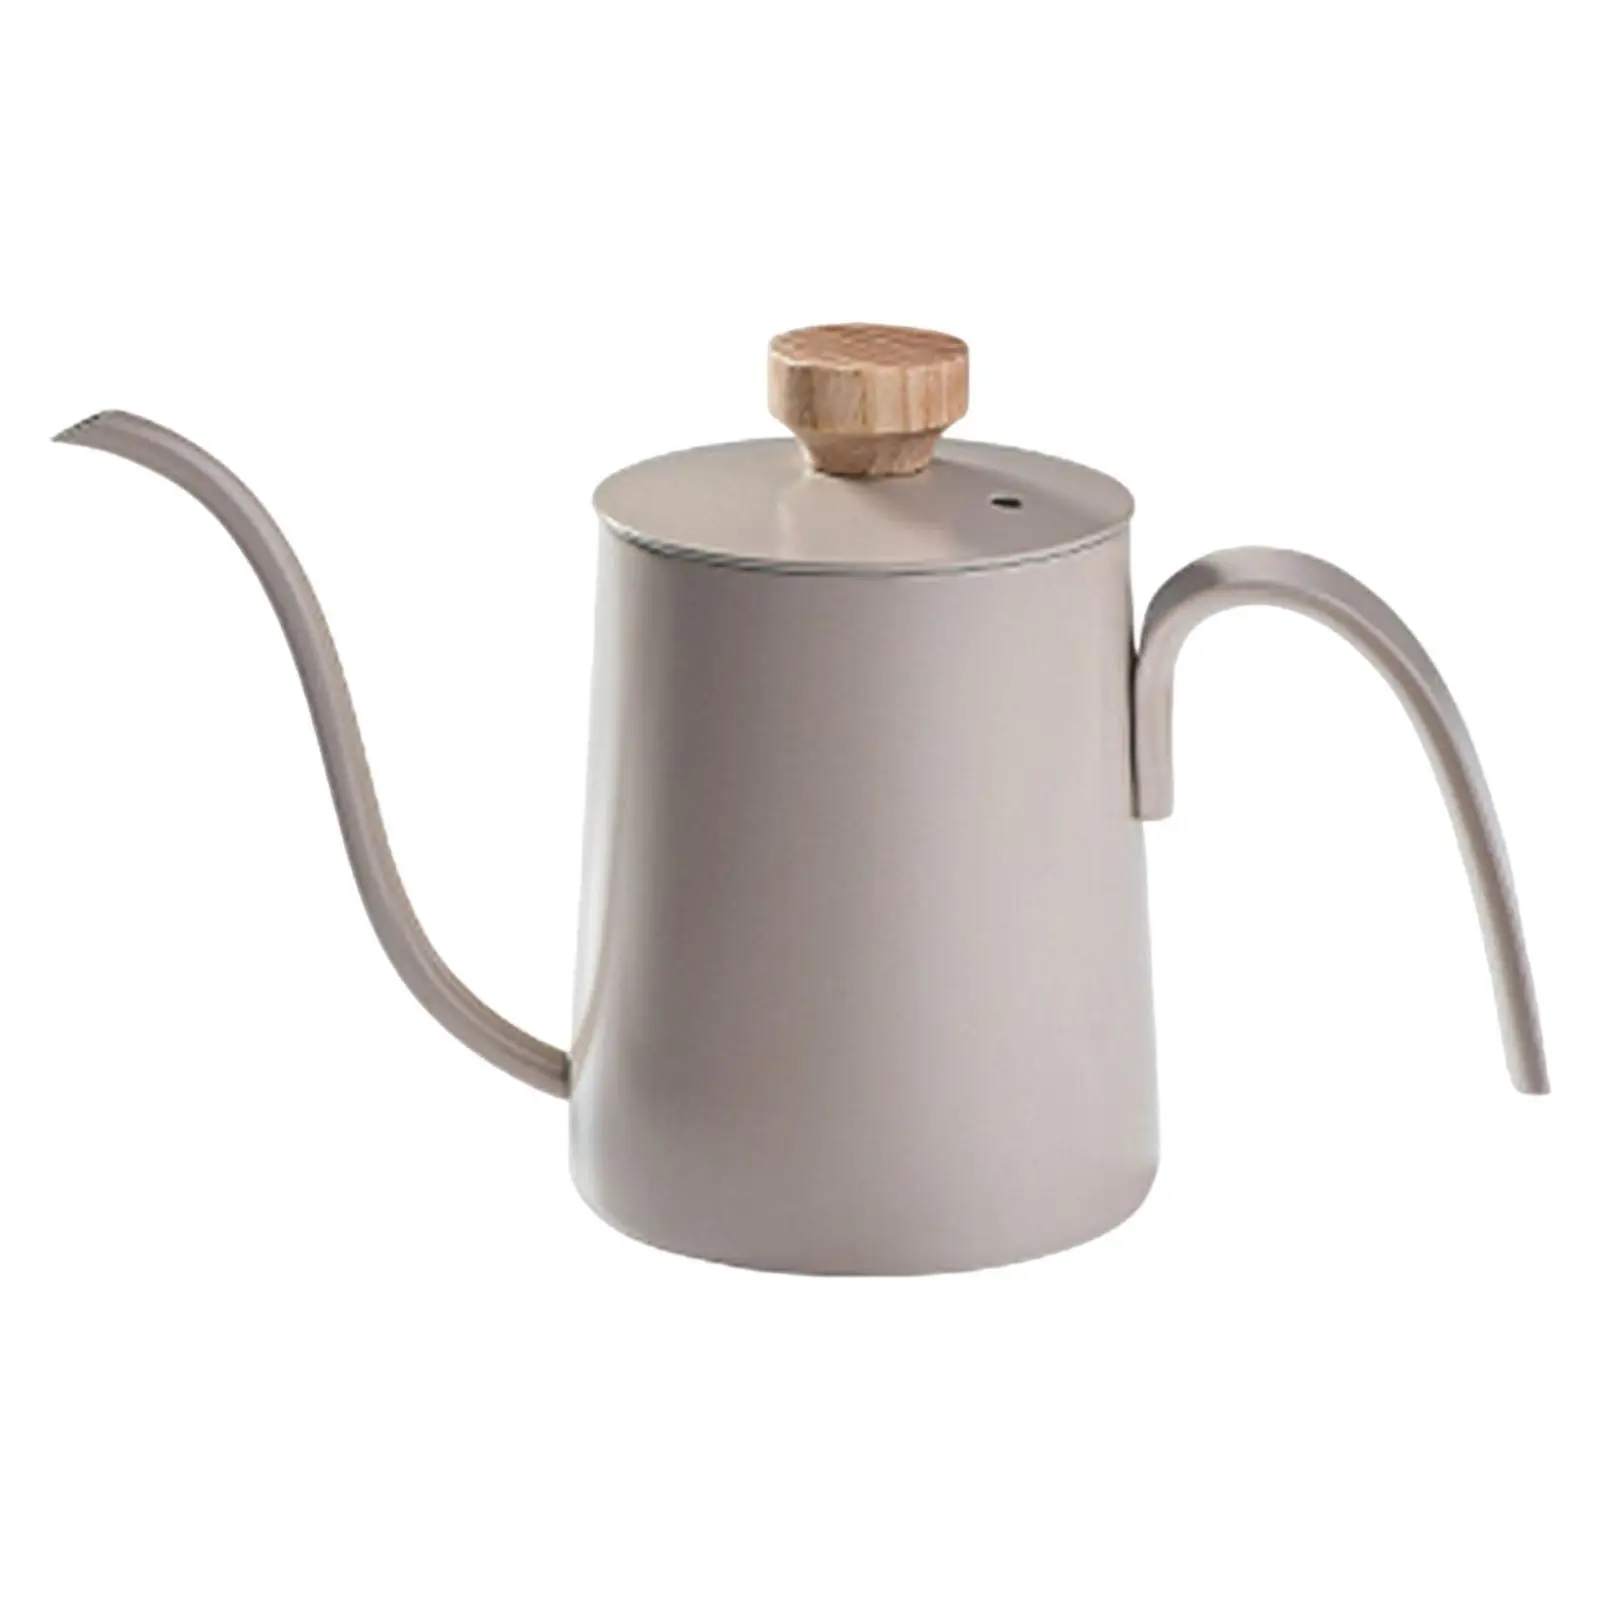 Stainless Steel Coffee Kettle Coffee Maker Kettle Gooseneck Narrow Ergonomic Handle 350ml Pour Over Kettle for Home Cafe Kitchen